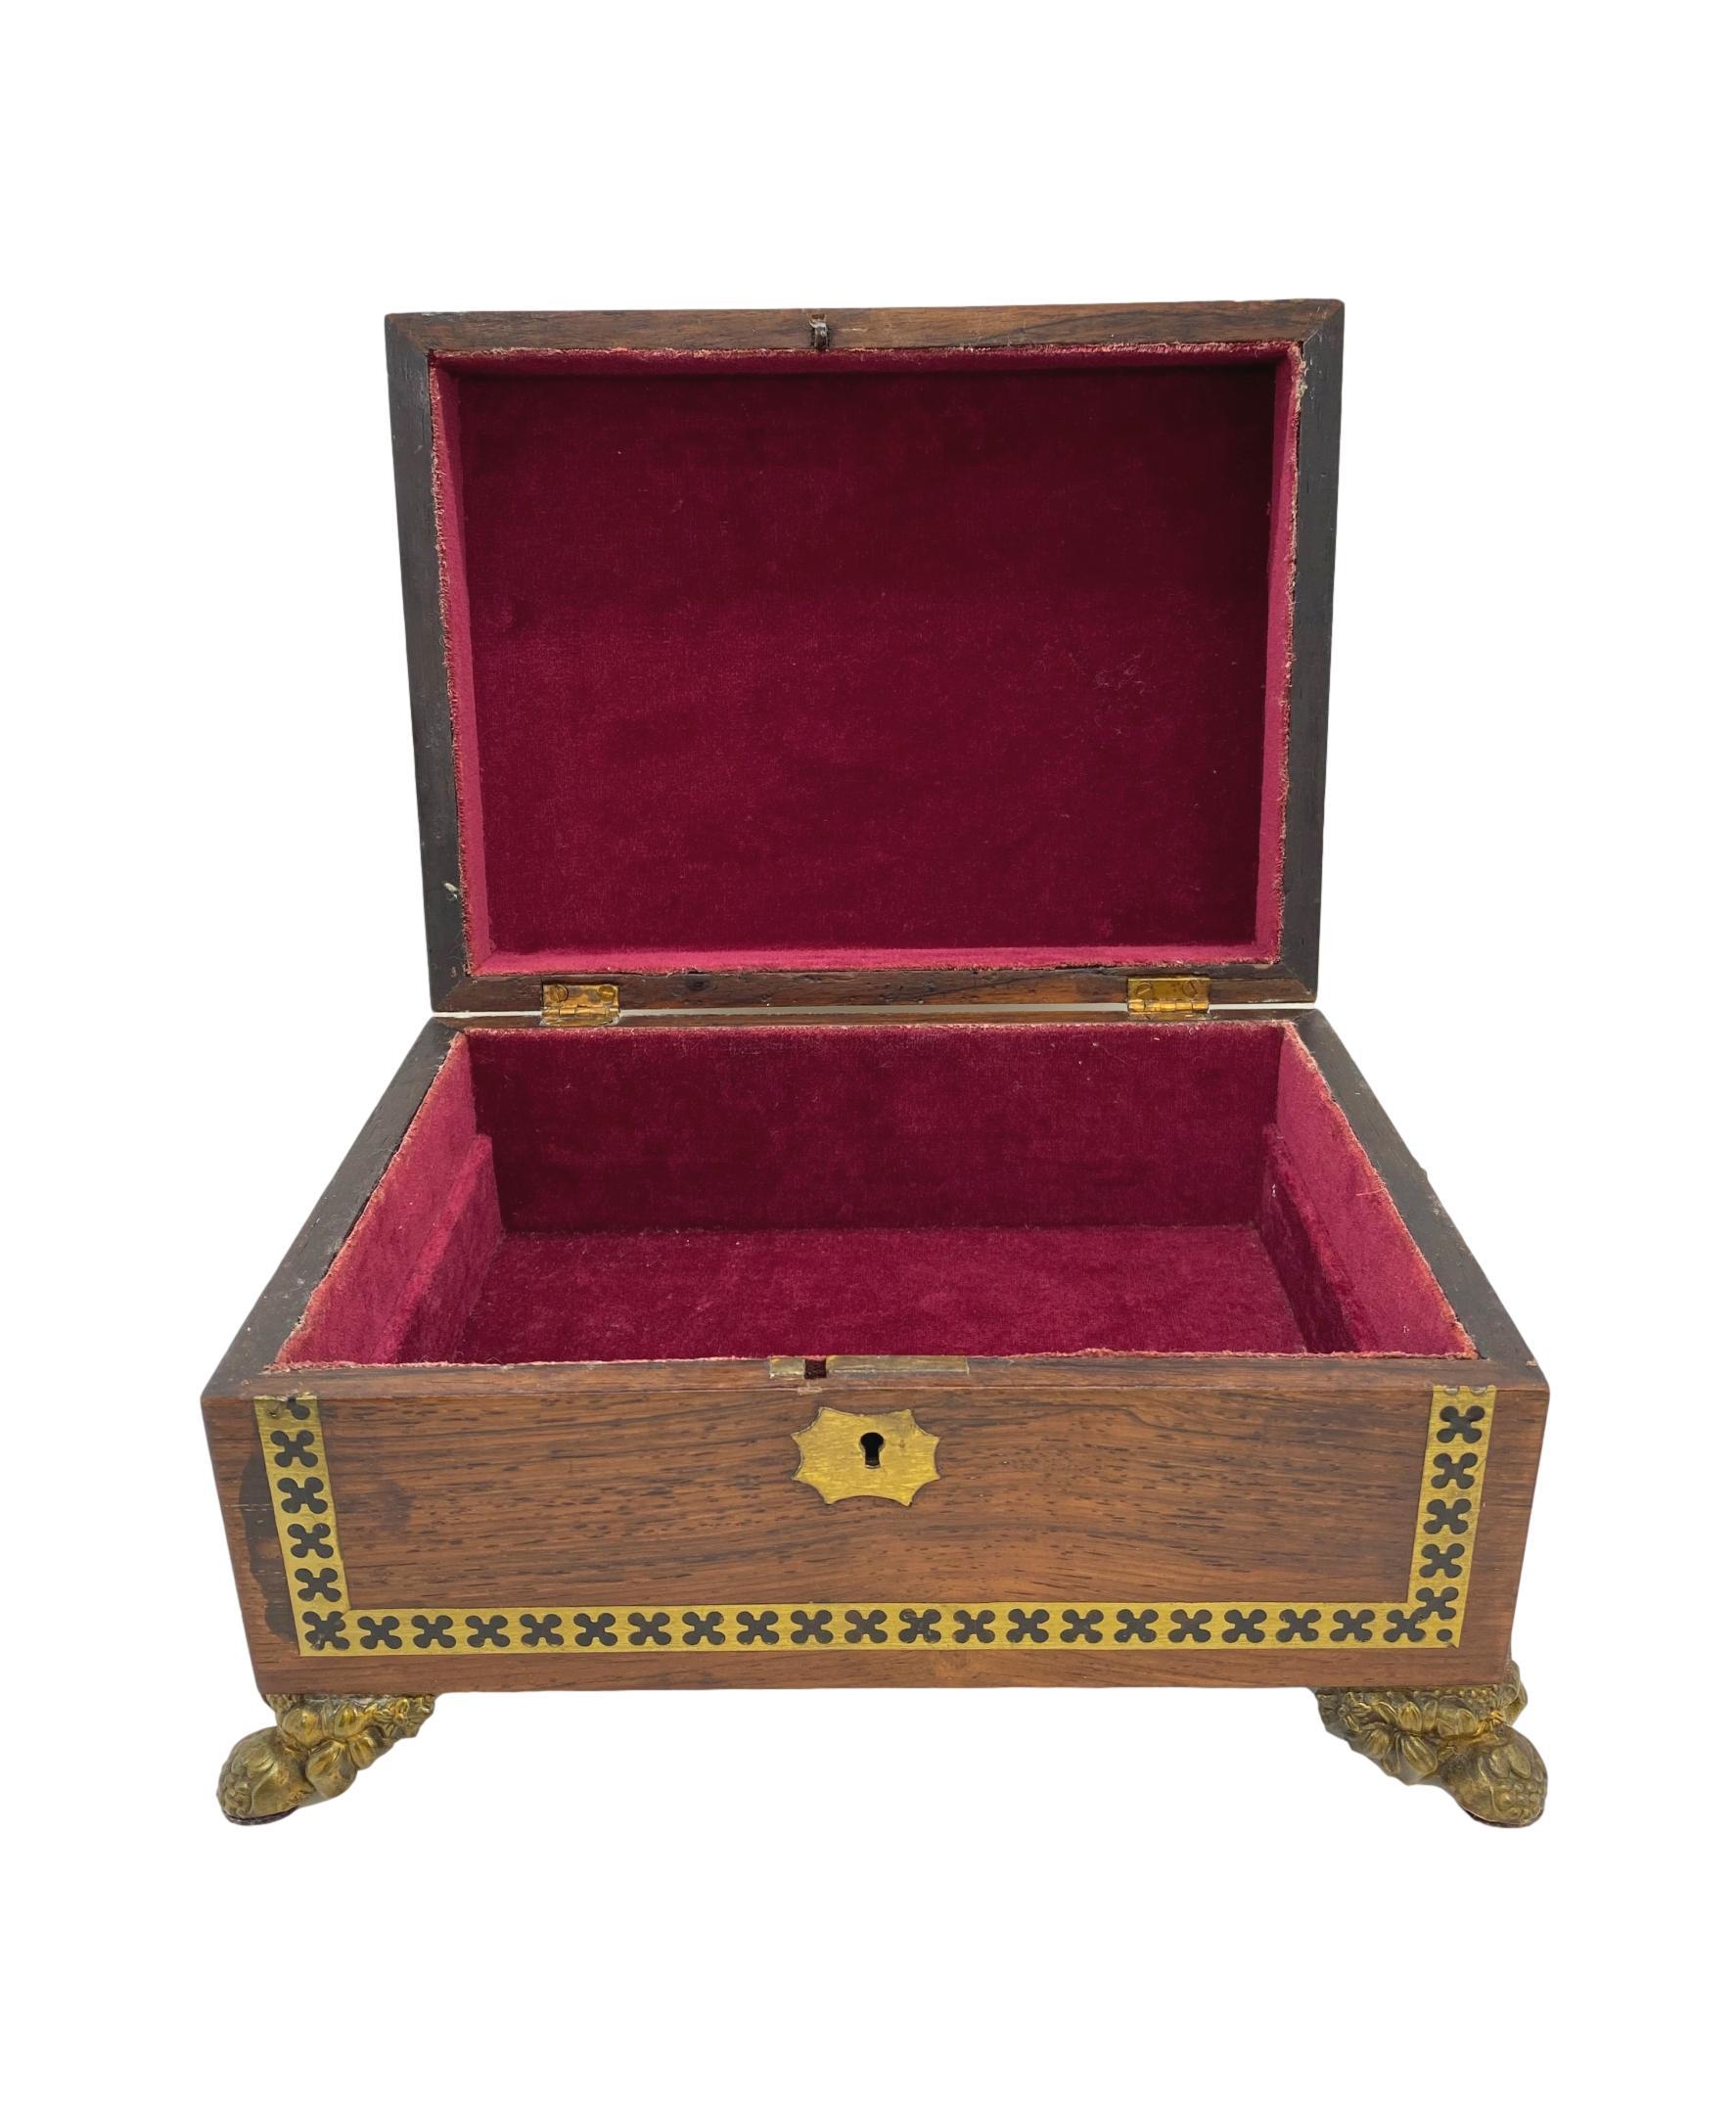 Antique Regency Box in Rosewood with Inlaid Ebony and Brass, English, circa 1820 For Sale 3